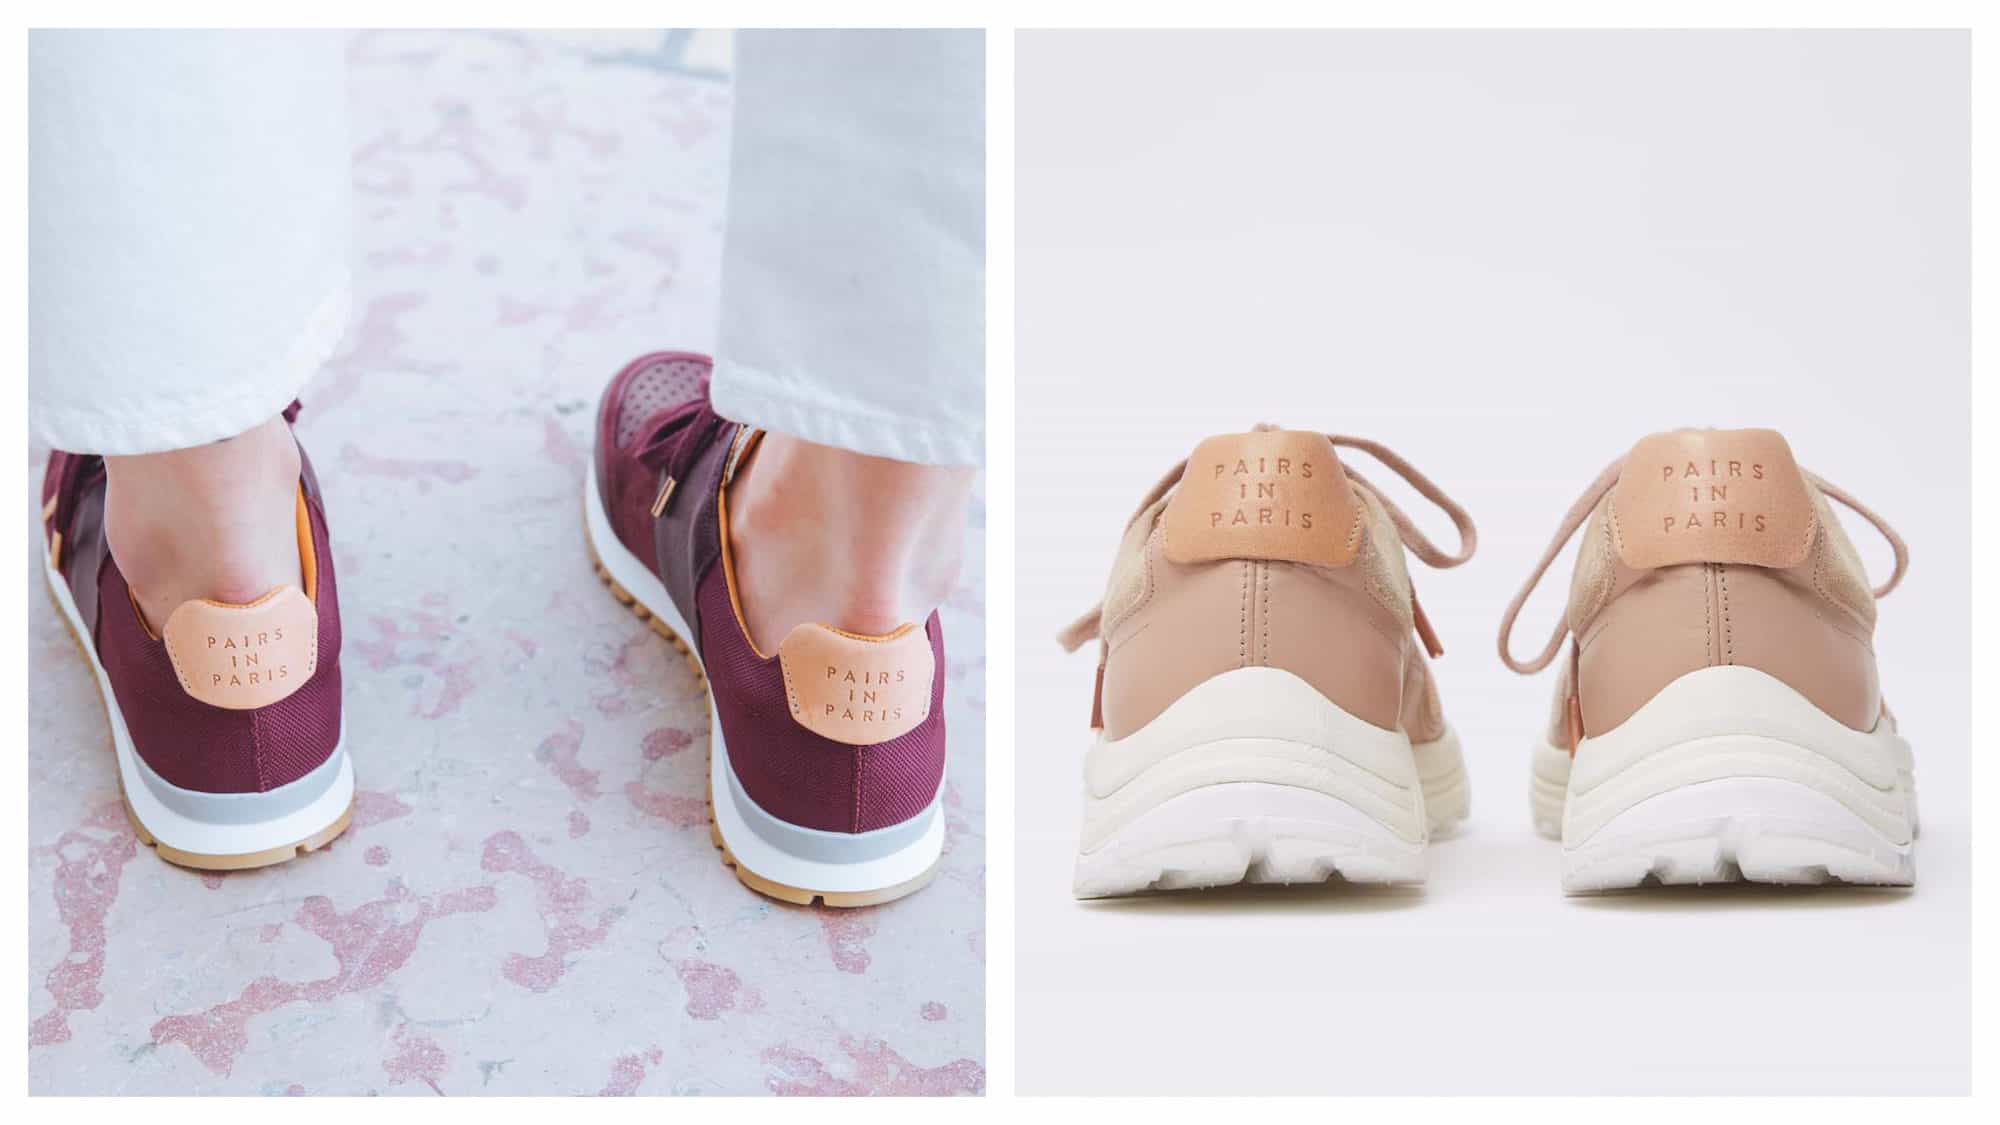 The Parisian shoe brand to shop is Paris in Paris, for its comfortable sneakers that come in different colors like this dark red ones (left) and beige pair (right).